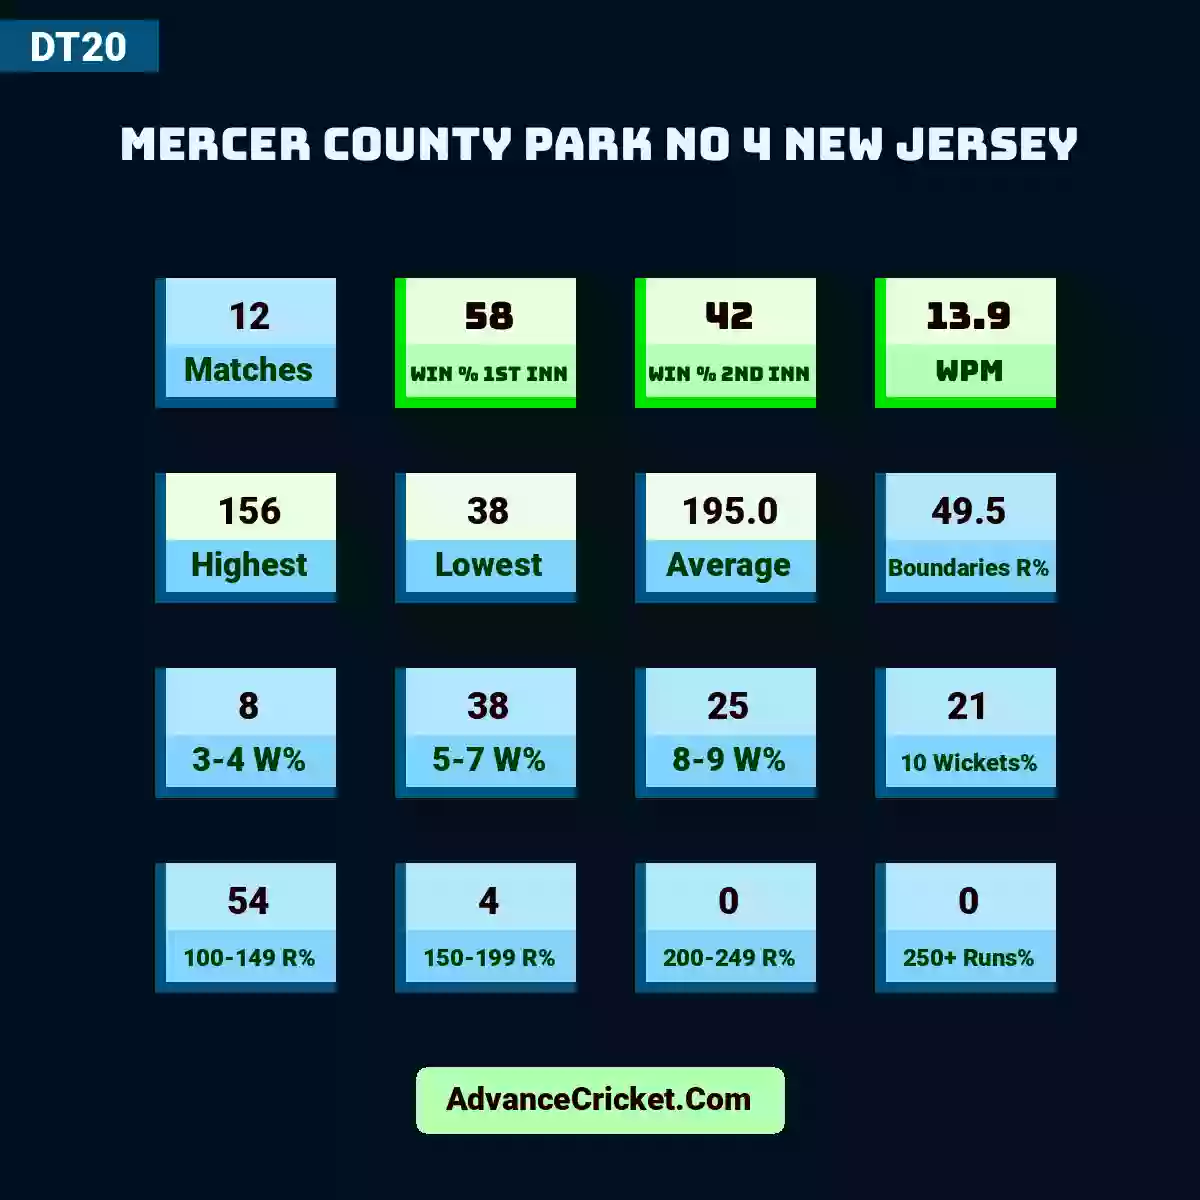 Image showing Mercer County Park no 4 New Jersey with Matches: 12, Win % 1st Inn: 58, Win % 2nd Inn: 42, WPM: 13.9, Highest: 156, Lowest: 38, Average: 195.0, Boundaries R%: 49.5, 3-4 W%: 8, 5-7 W%: 38, 8-9 W%: 25, 10 Wickets%: 21, 100-149 R%: 54, 150-199 R%: 4, 200-249 R%: 0, 250+ Runs%: 0.